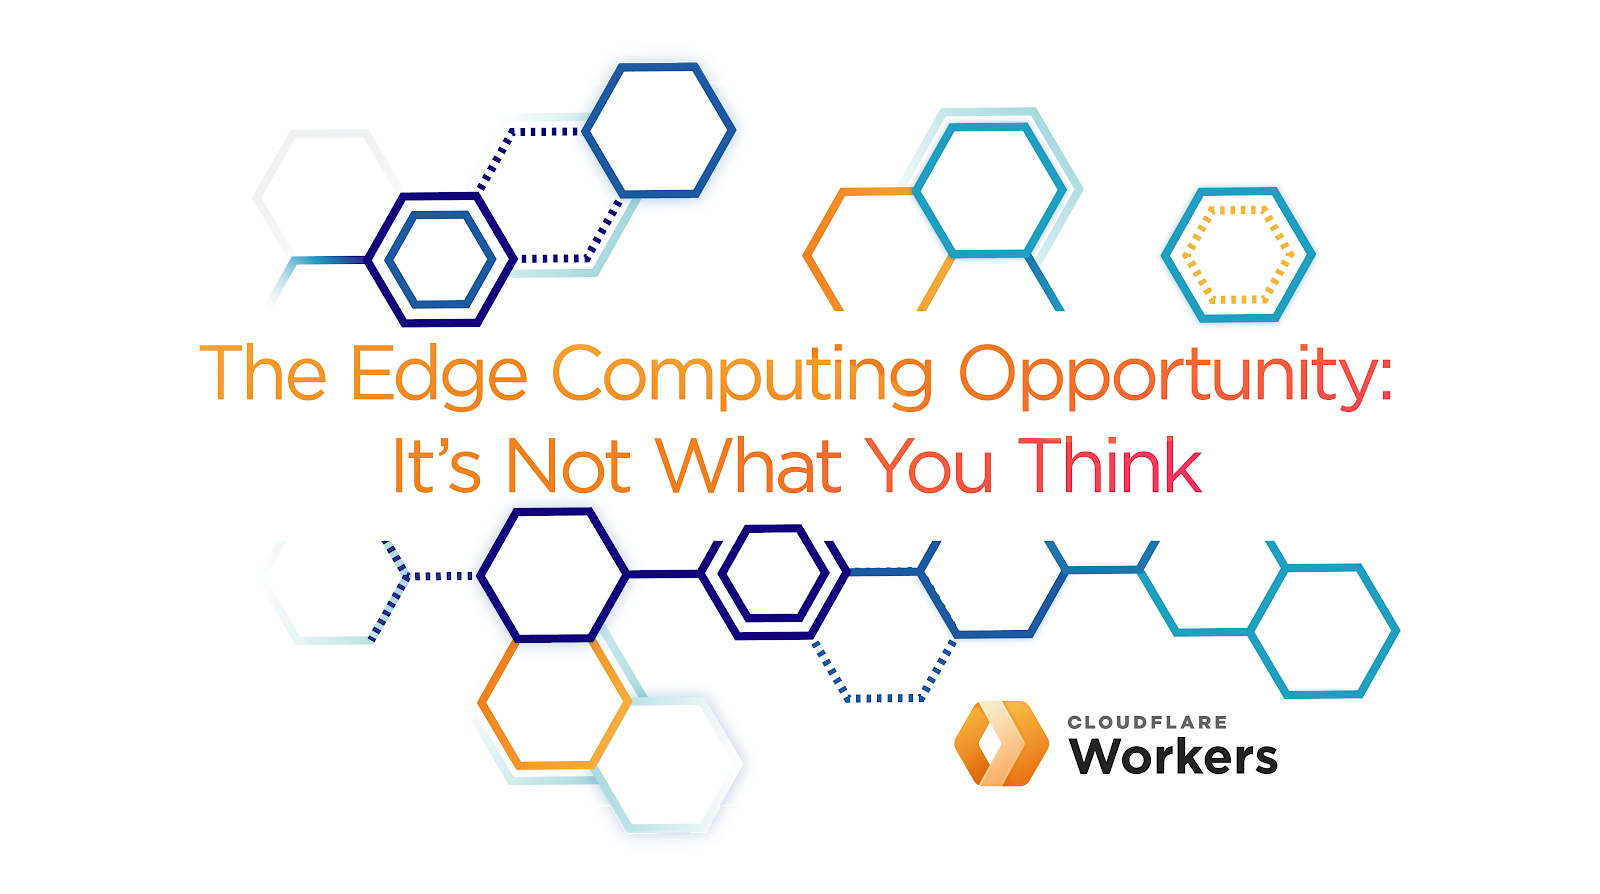 The Edge Computing Opportunity: It’s Not What You Think